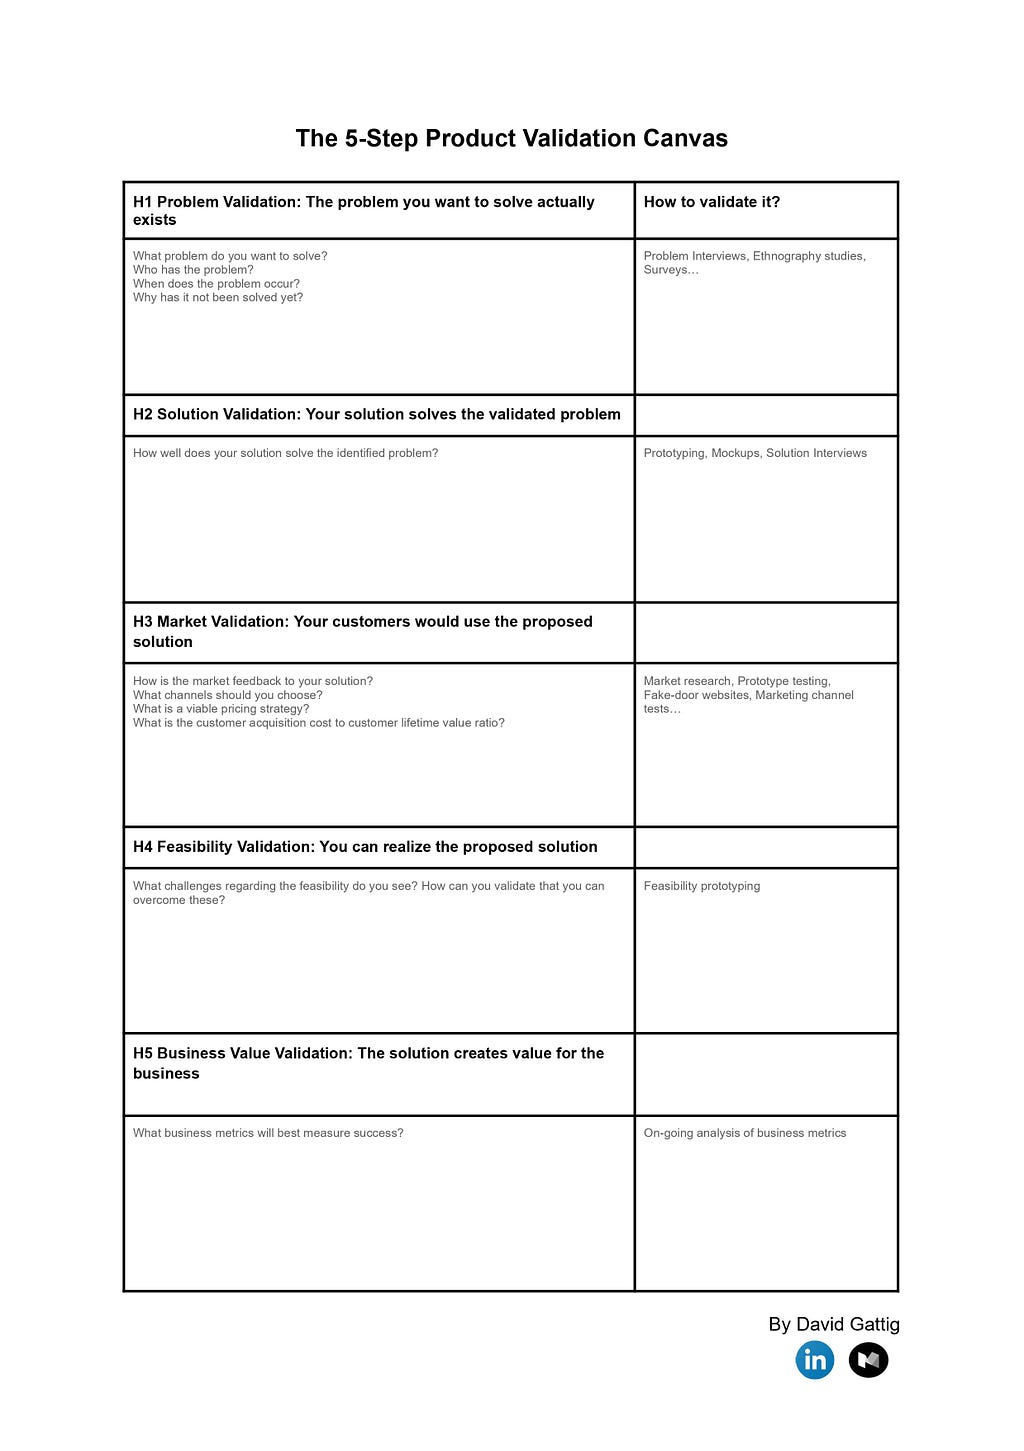 A canvas of the 5-step product validation framework summarizing the 5 steps andthe key questions and methodologies for each step